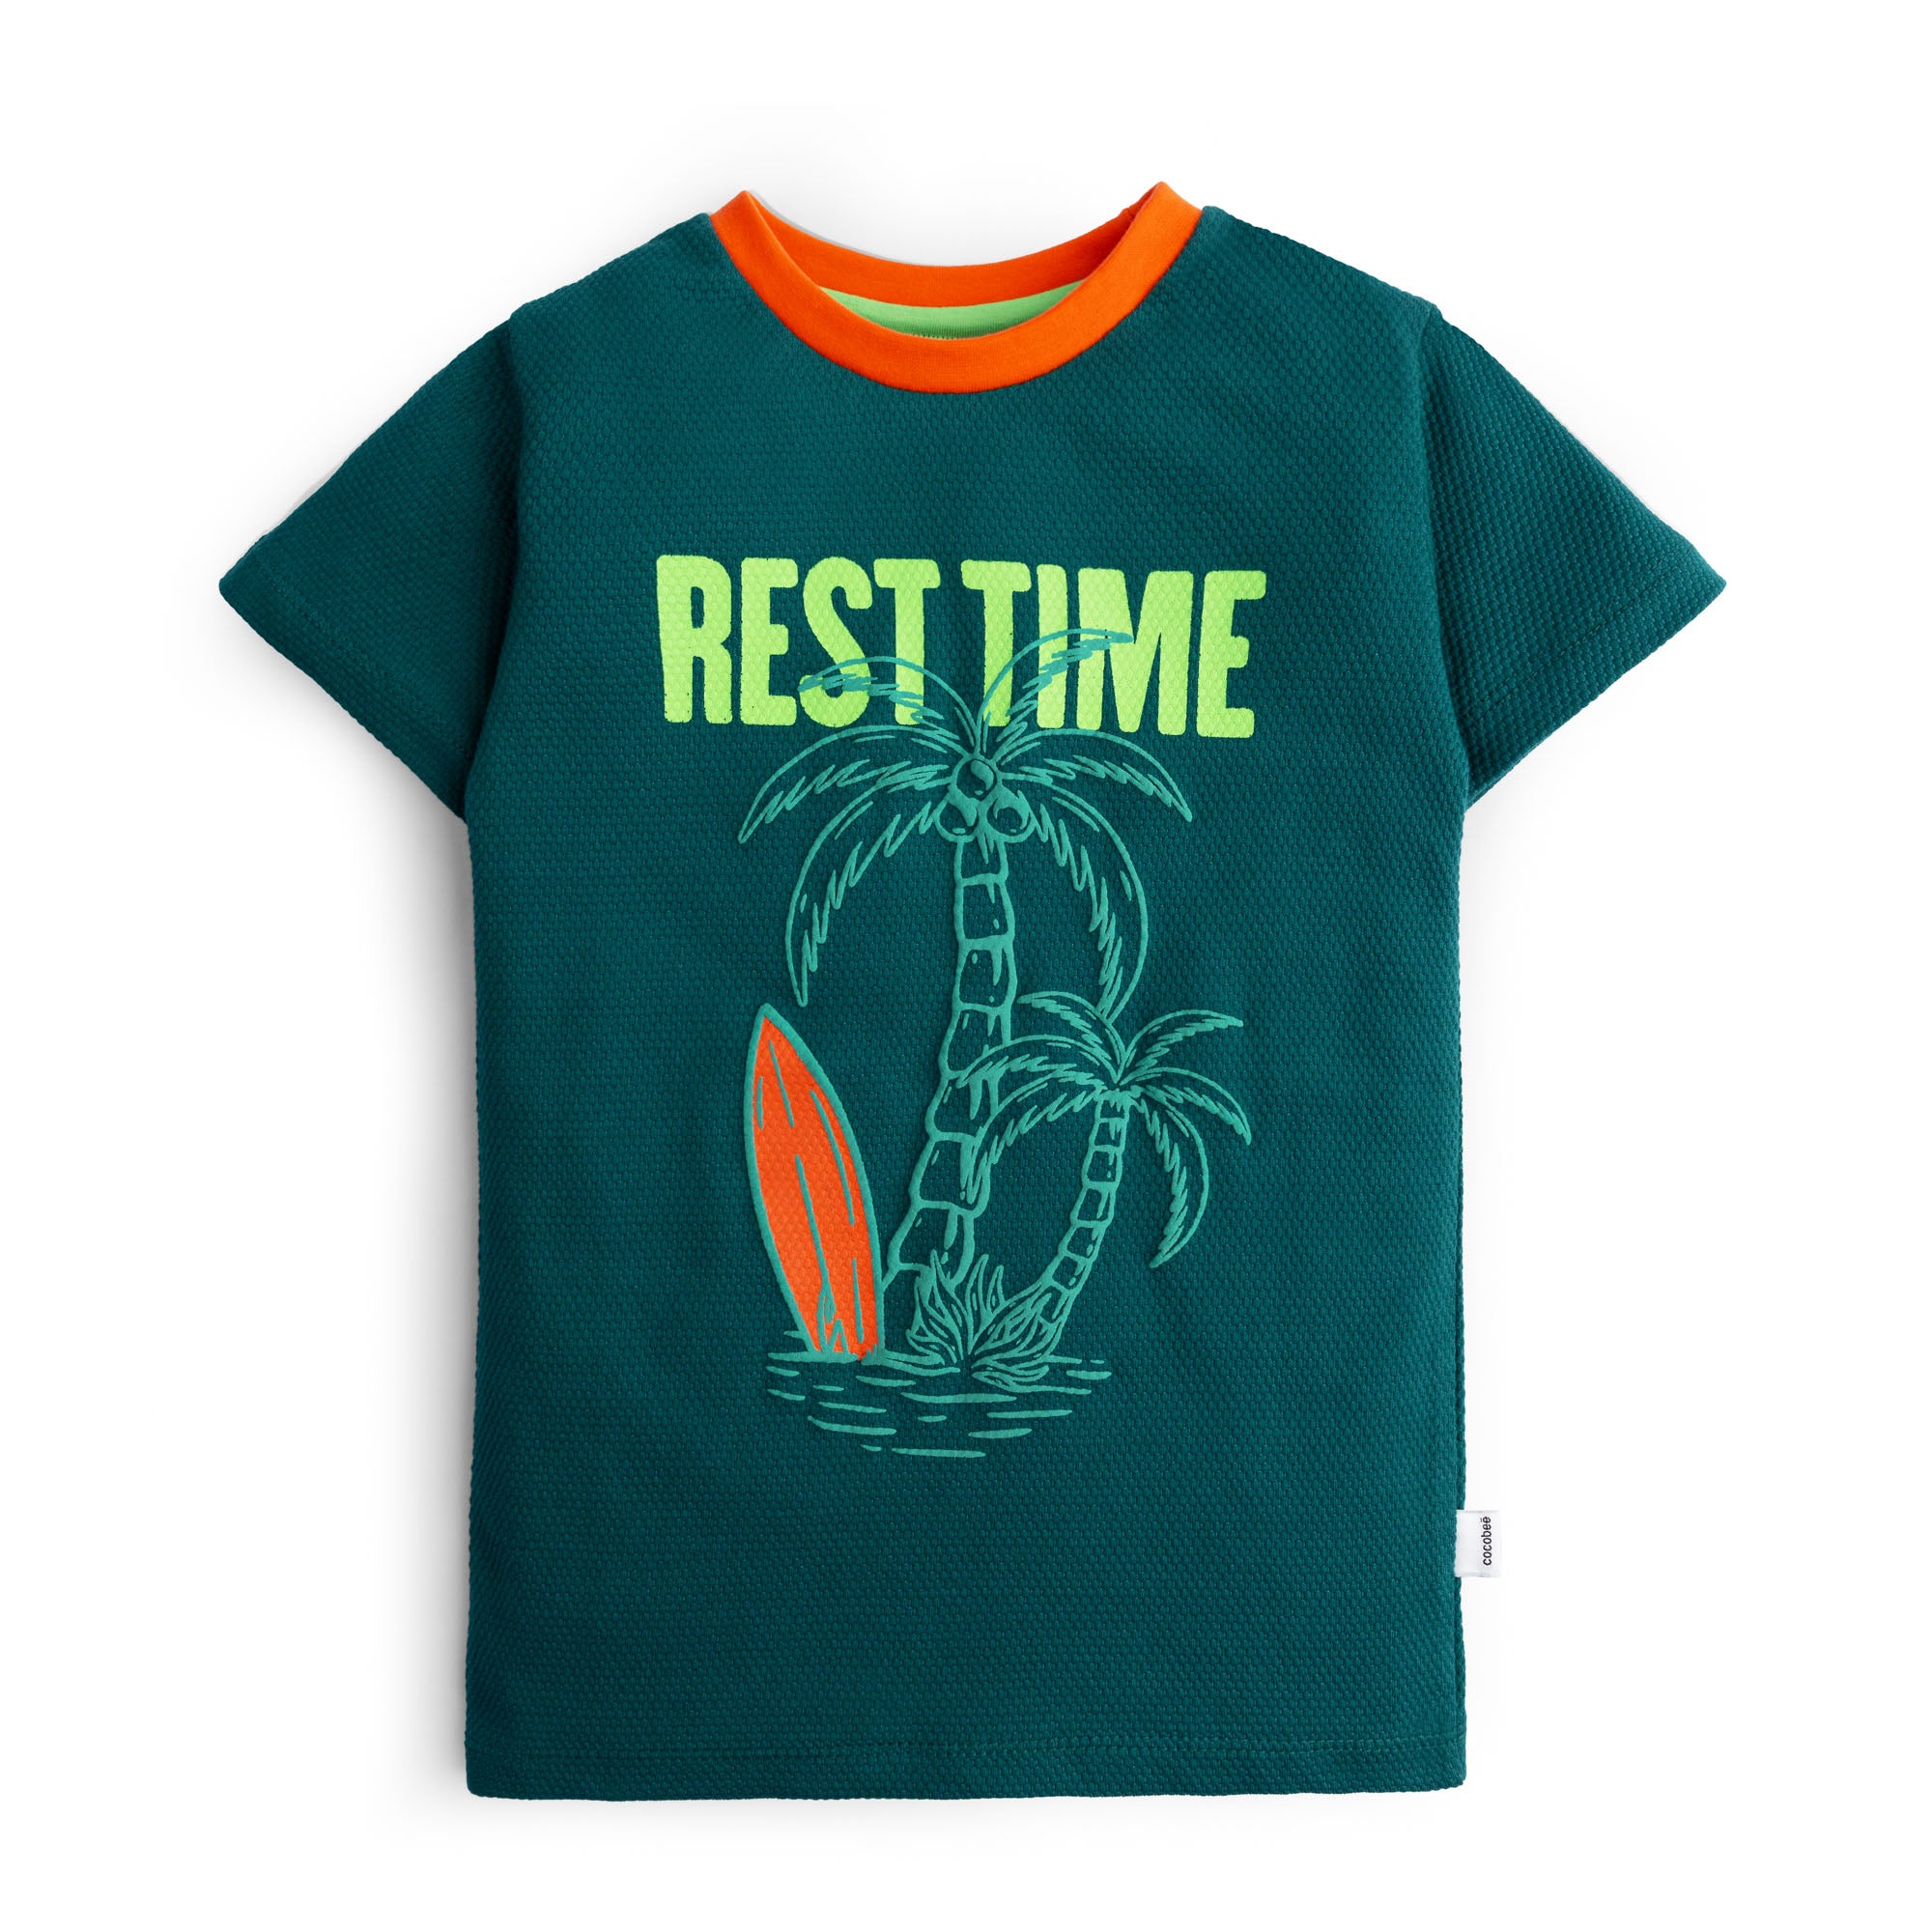 Tranquil Teal T-shirt